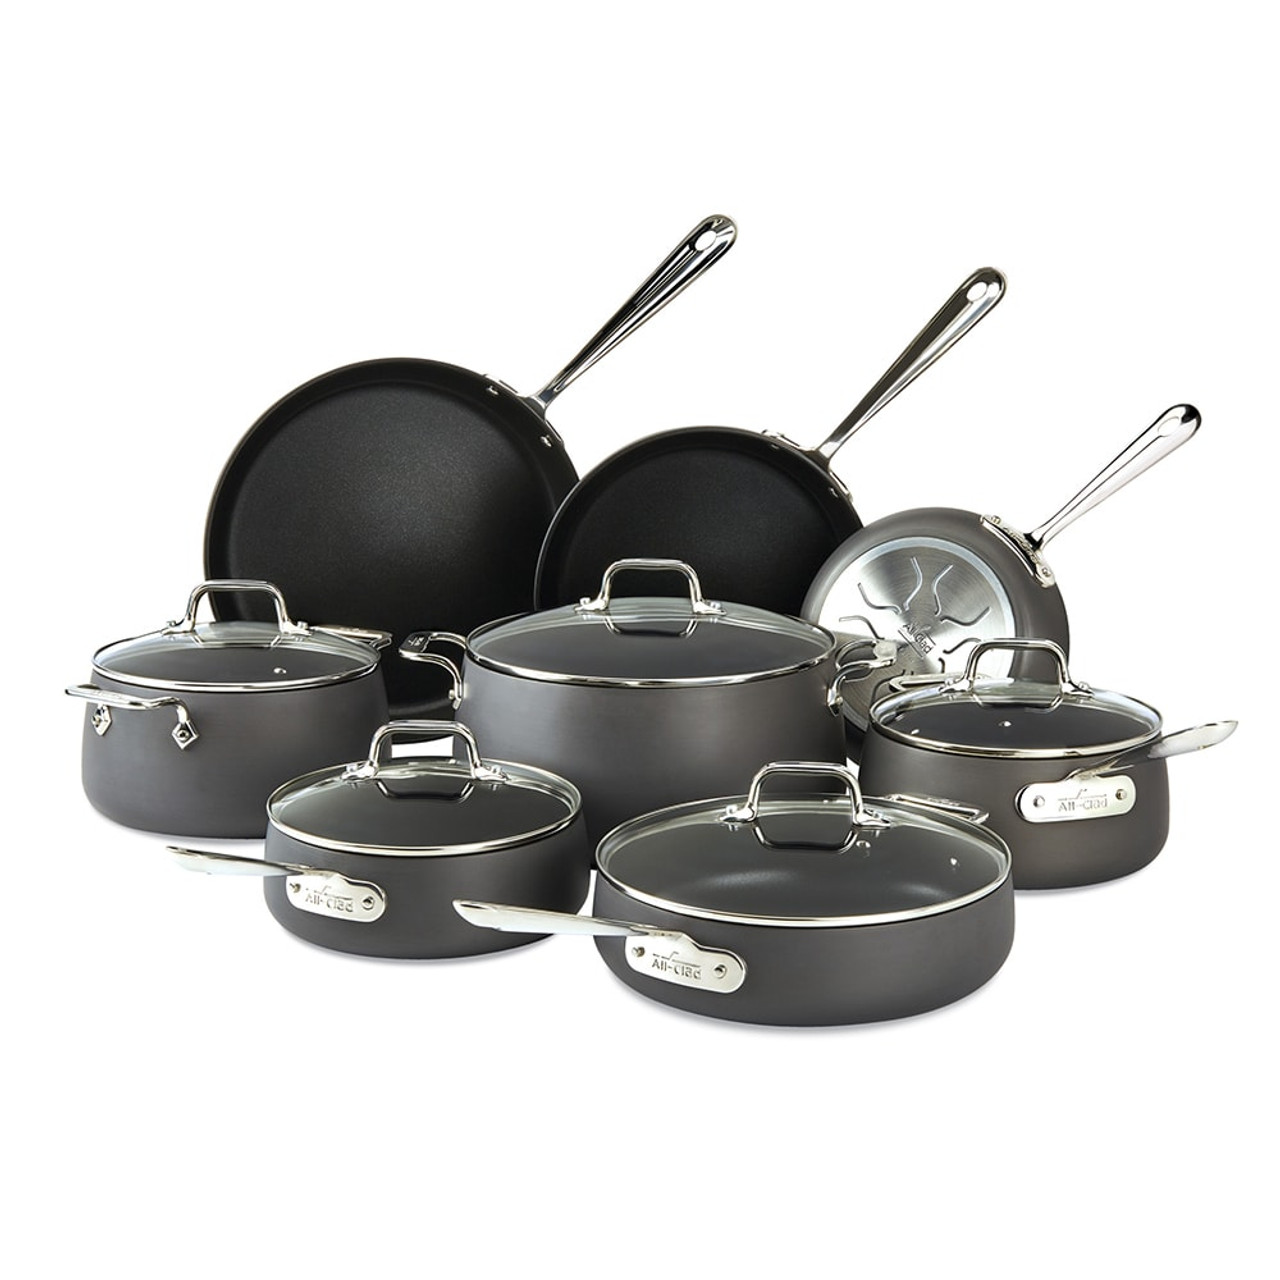 https://cdn11.bigcommerce.com/s-hccytny0od/images/stencil/1280x1280/products/519/8407/all-clad-ha1-13-piece-cookware-set__21938.1576080481.jpg?c=2?imbypass=on